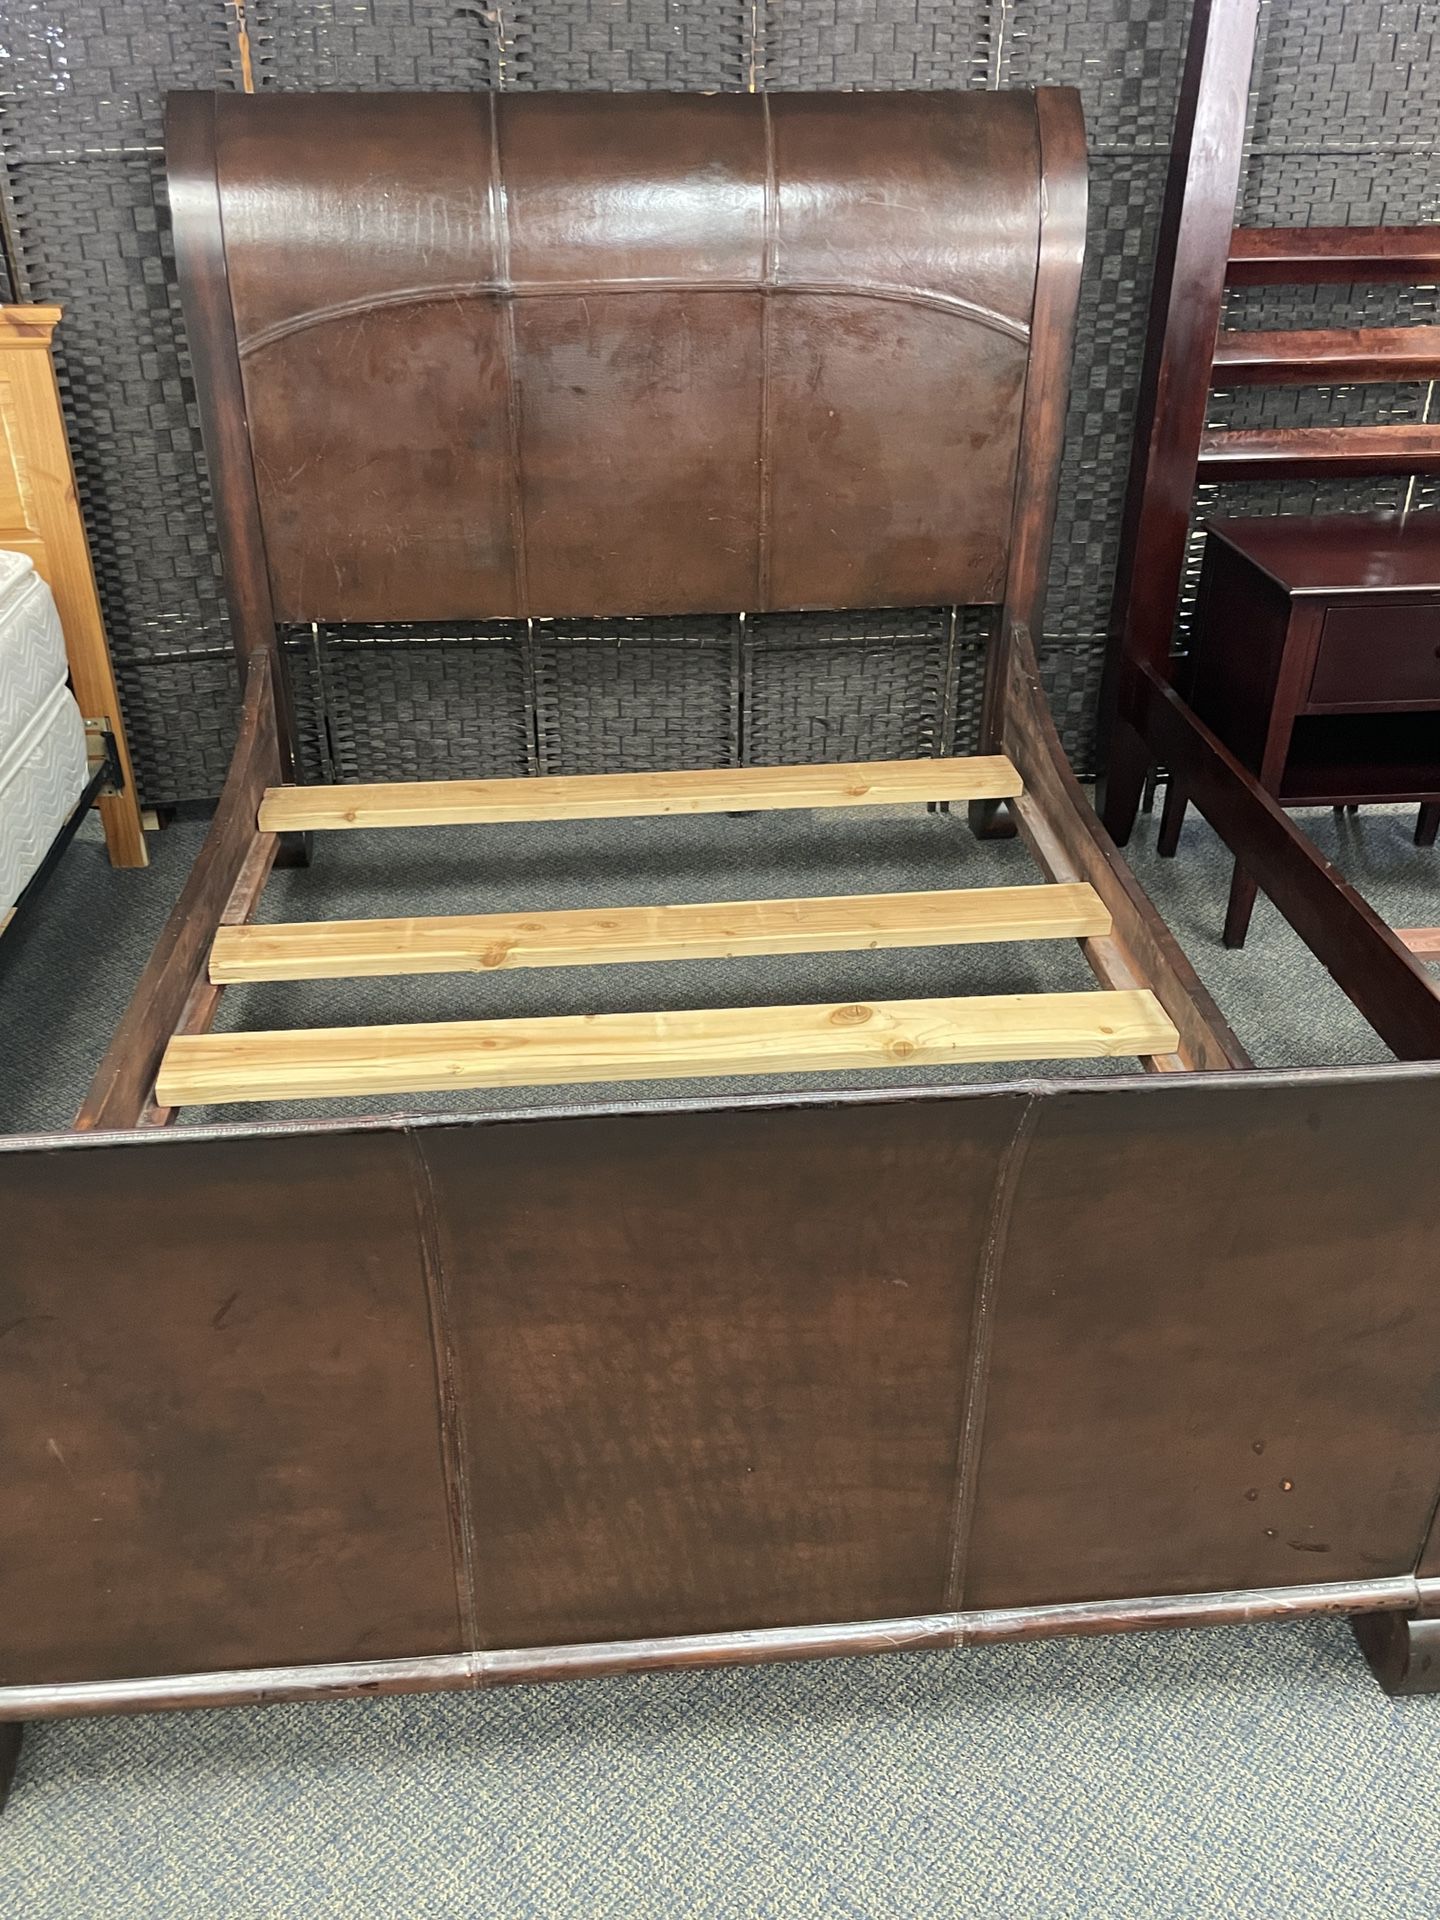 Queen Bed frame, Real Leather And Wood, Very Unique, Click On My Name To See Other Offers.